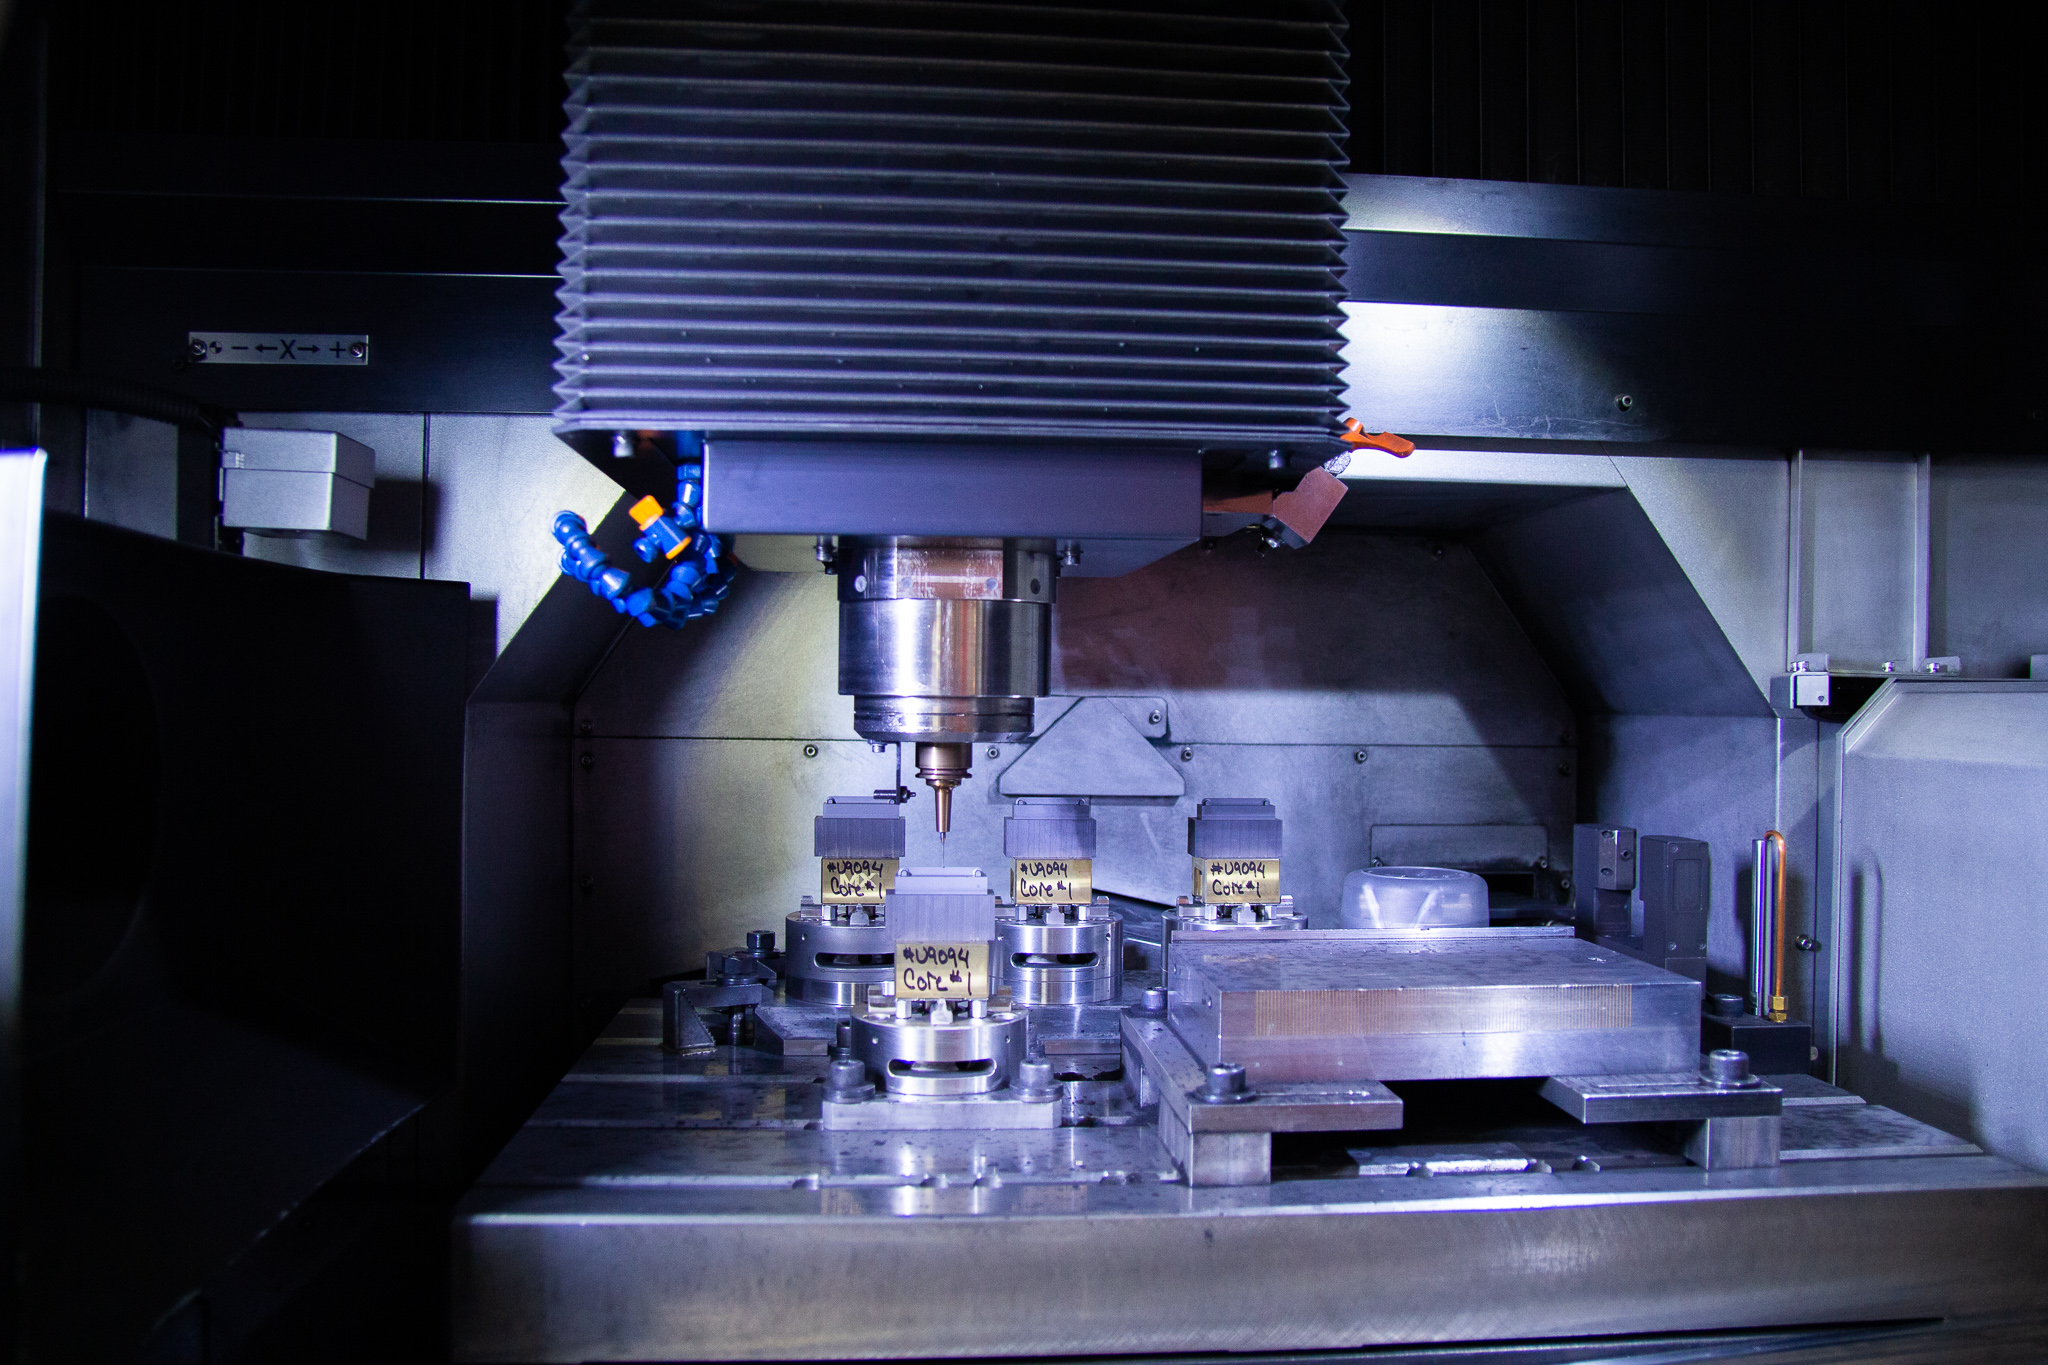 High-speed CNC mill cutting carbon on macros